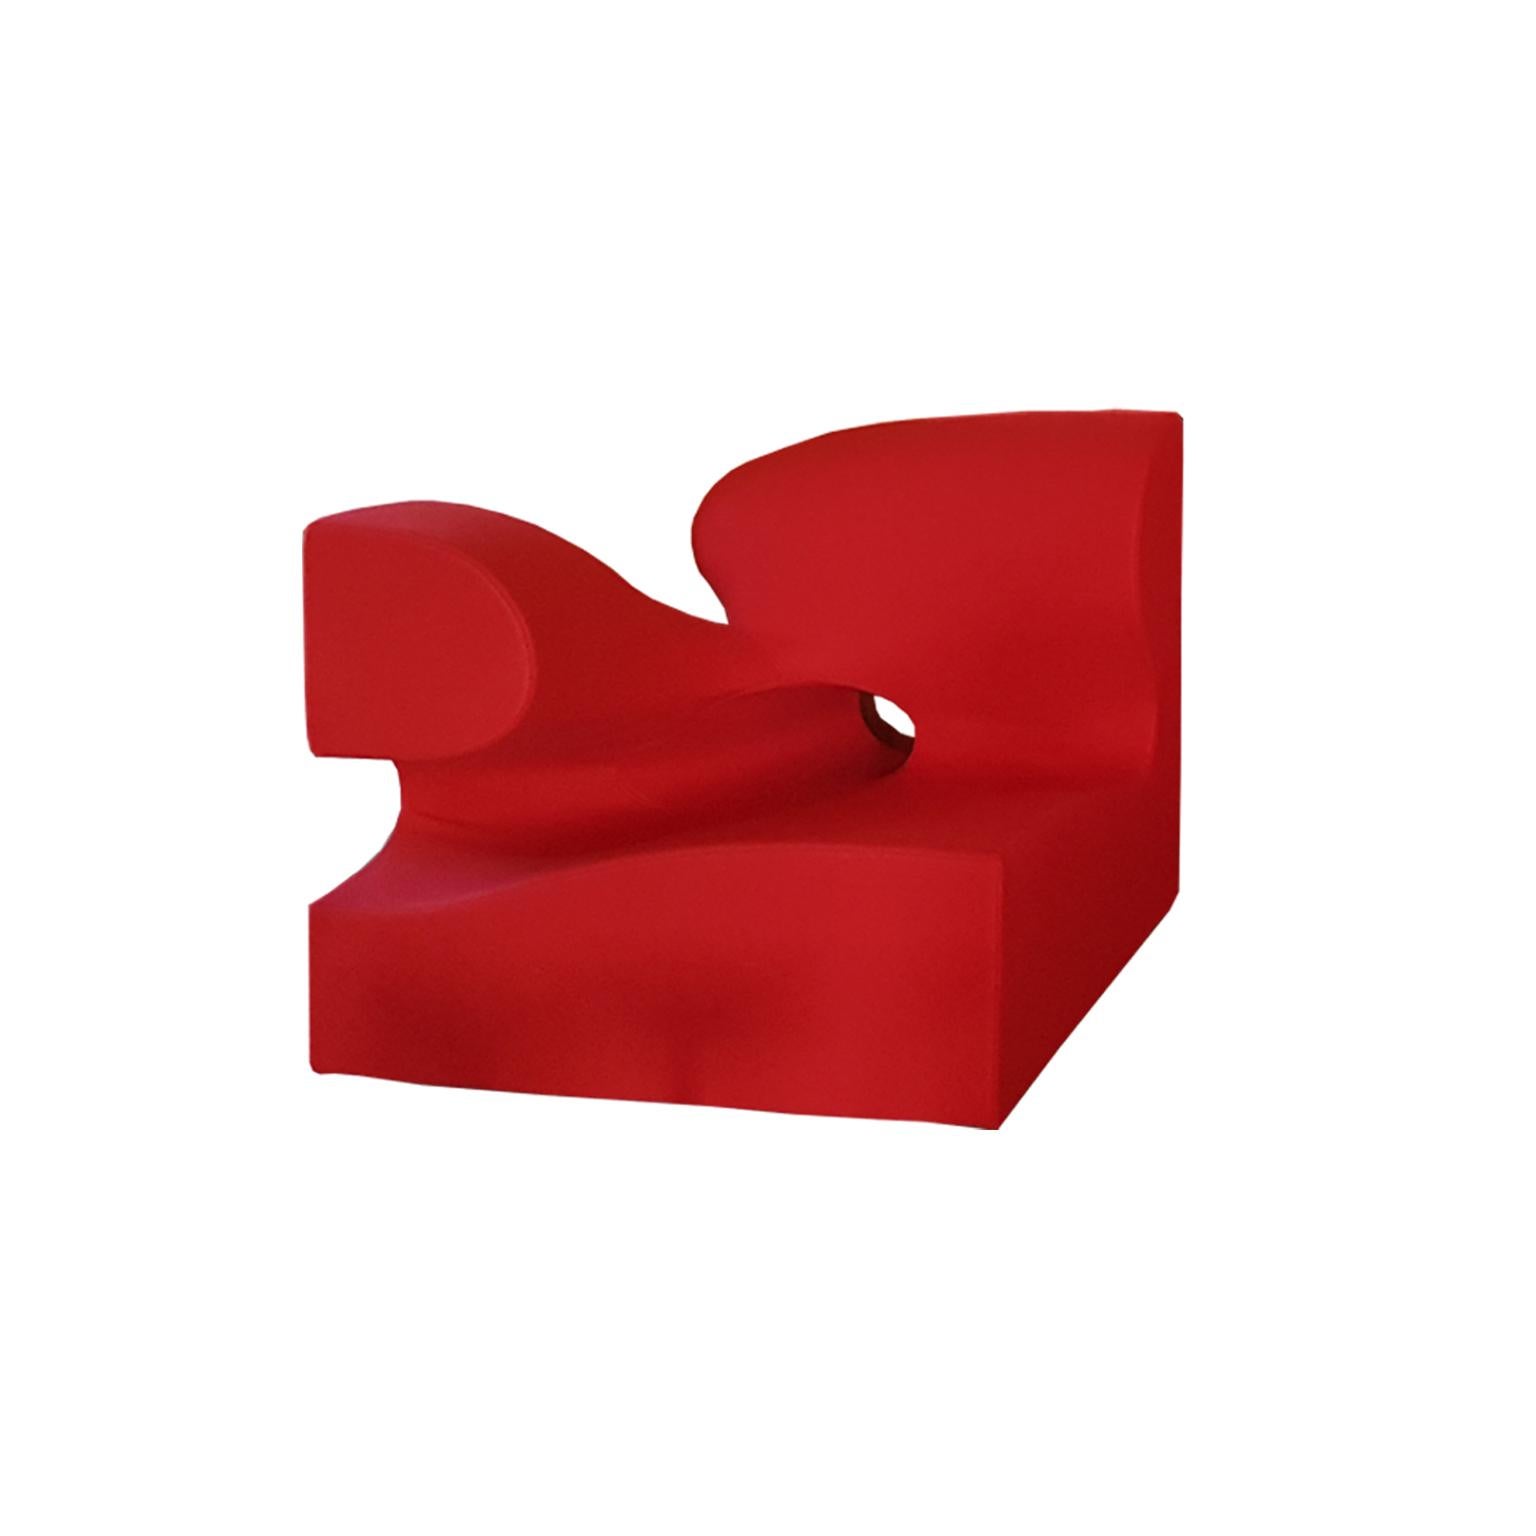 Contemporary Italian Moroso Modular Sofa with Red Wool Upholstery by Ron Arad For Sale 6